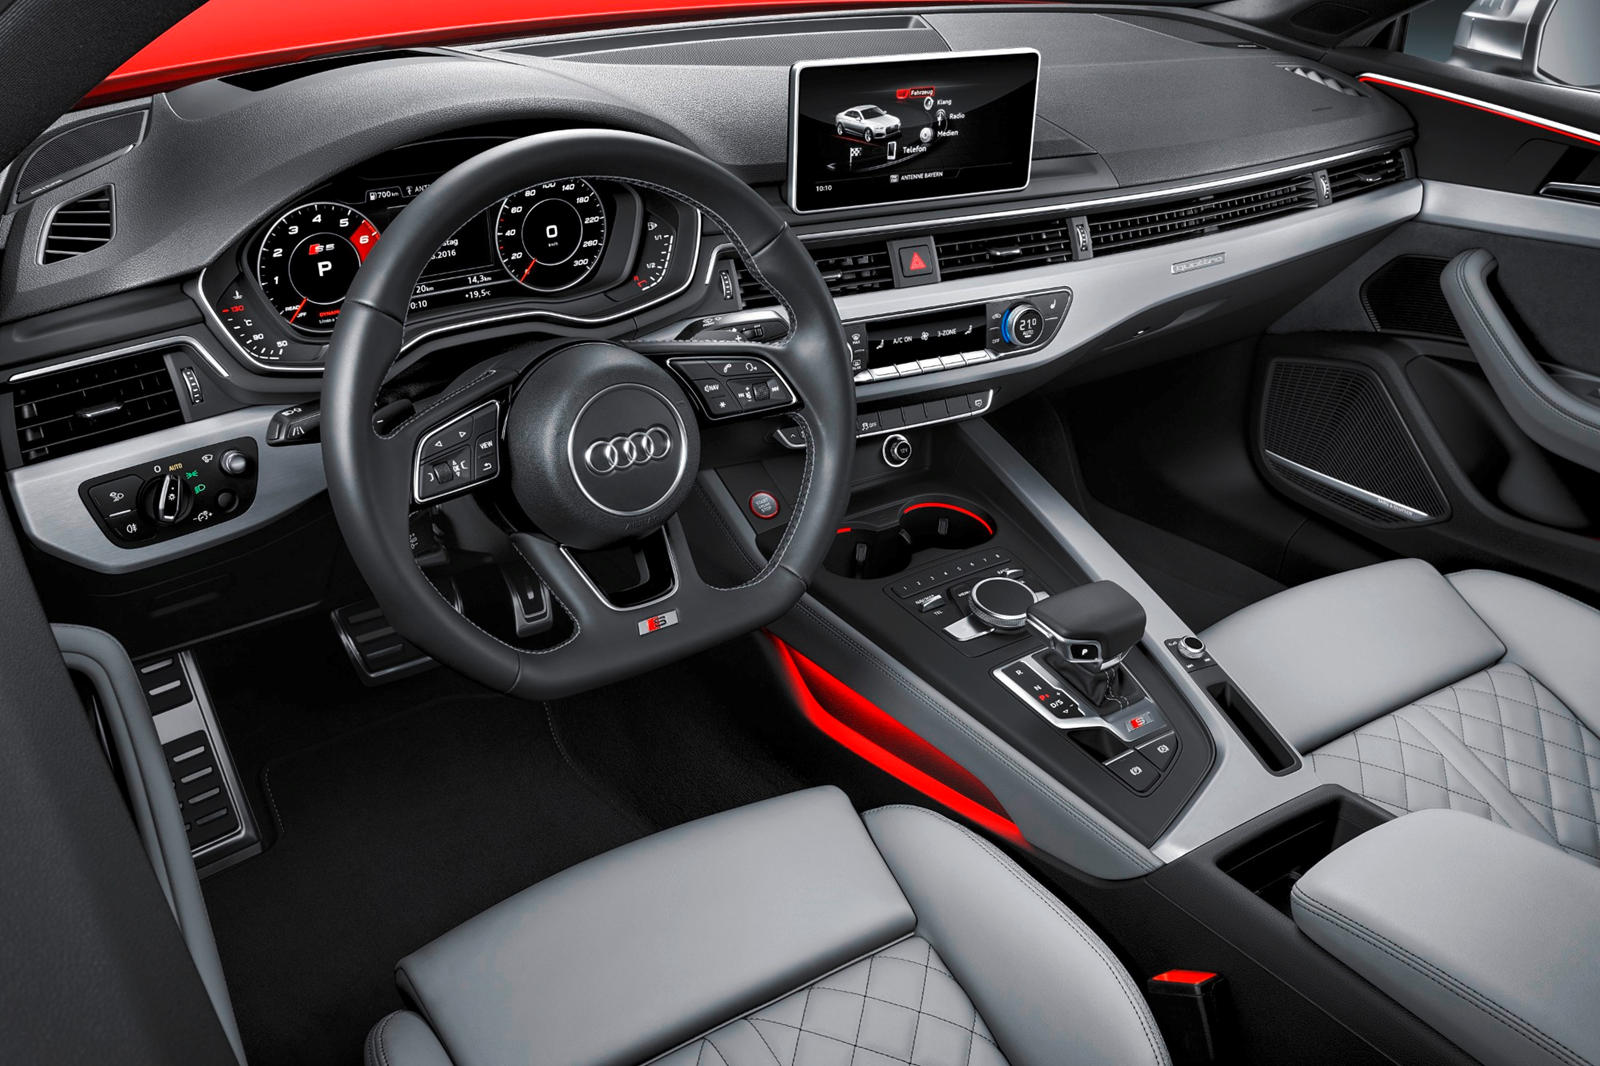 2019 Audi S5 Coupe Interior Dimensions: Seating, Cargo Space & Trunk Size -  Photos | CarBuzz